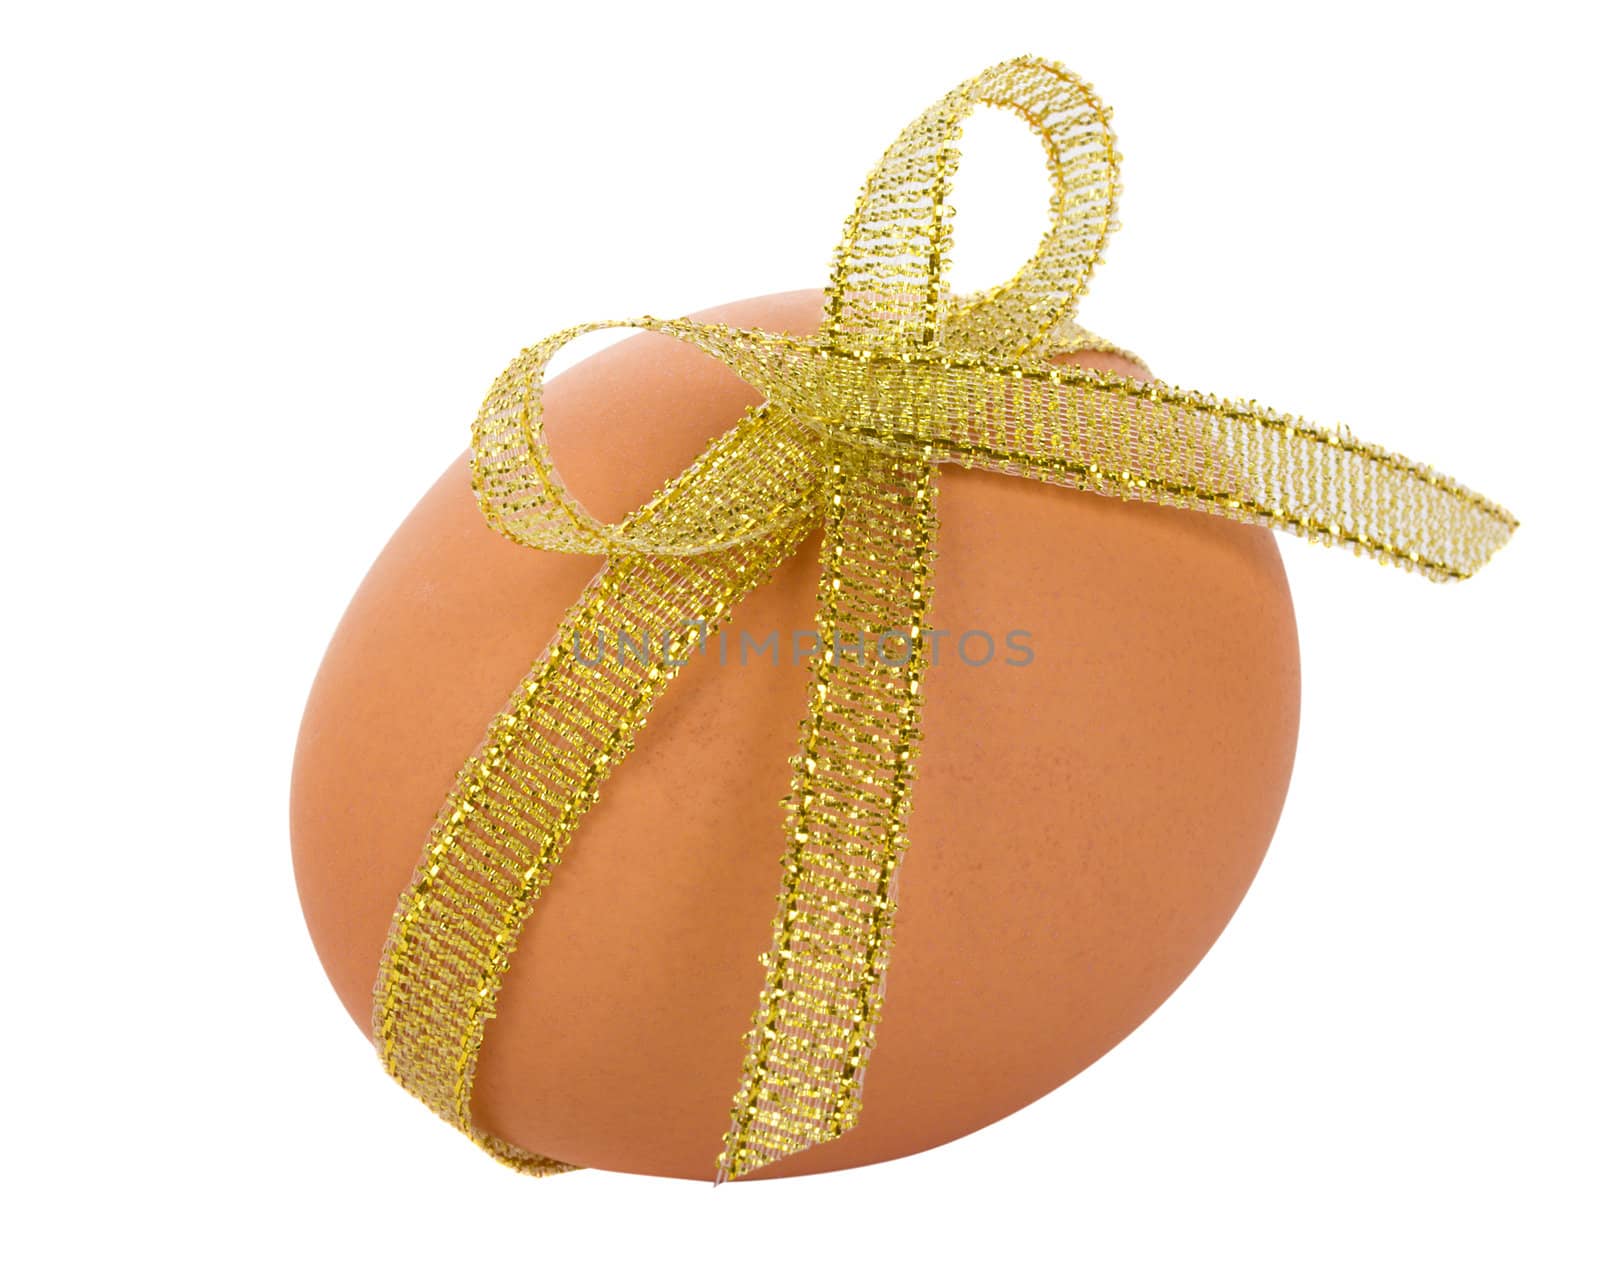 decorated egg by Alekcey